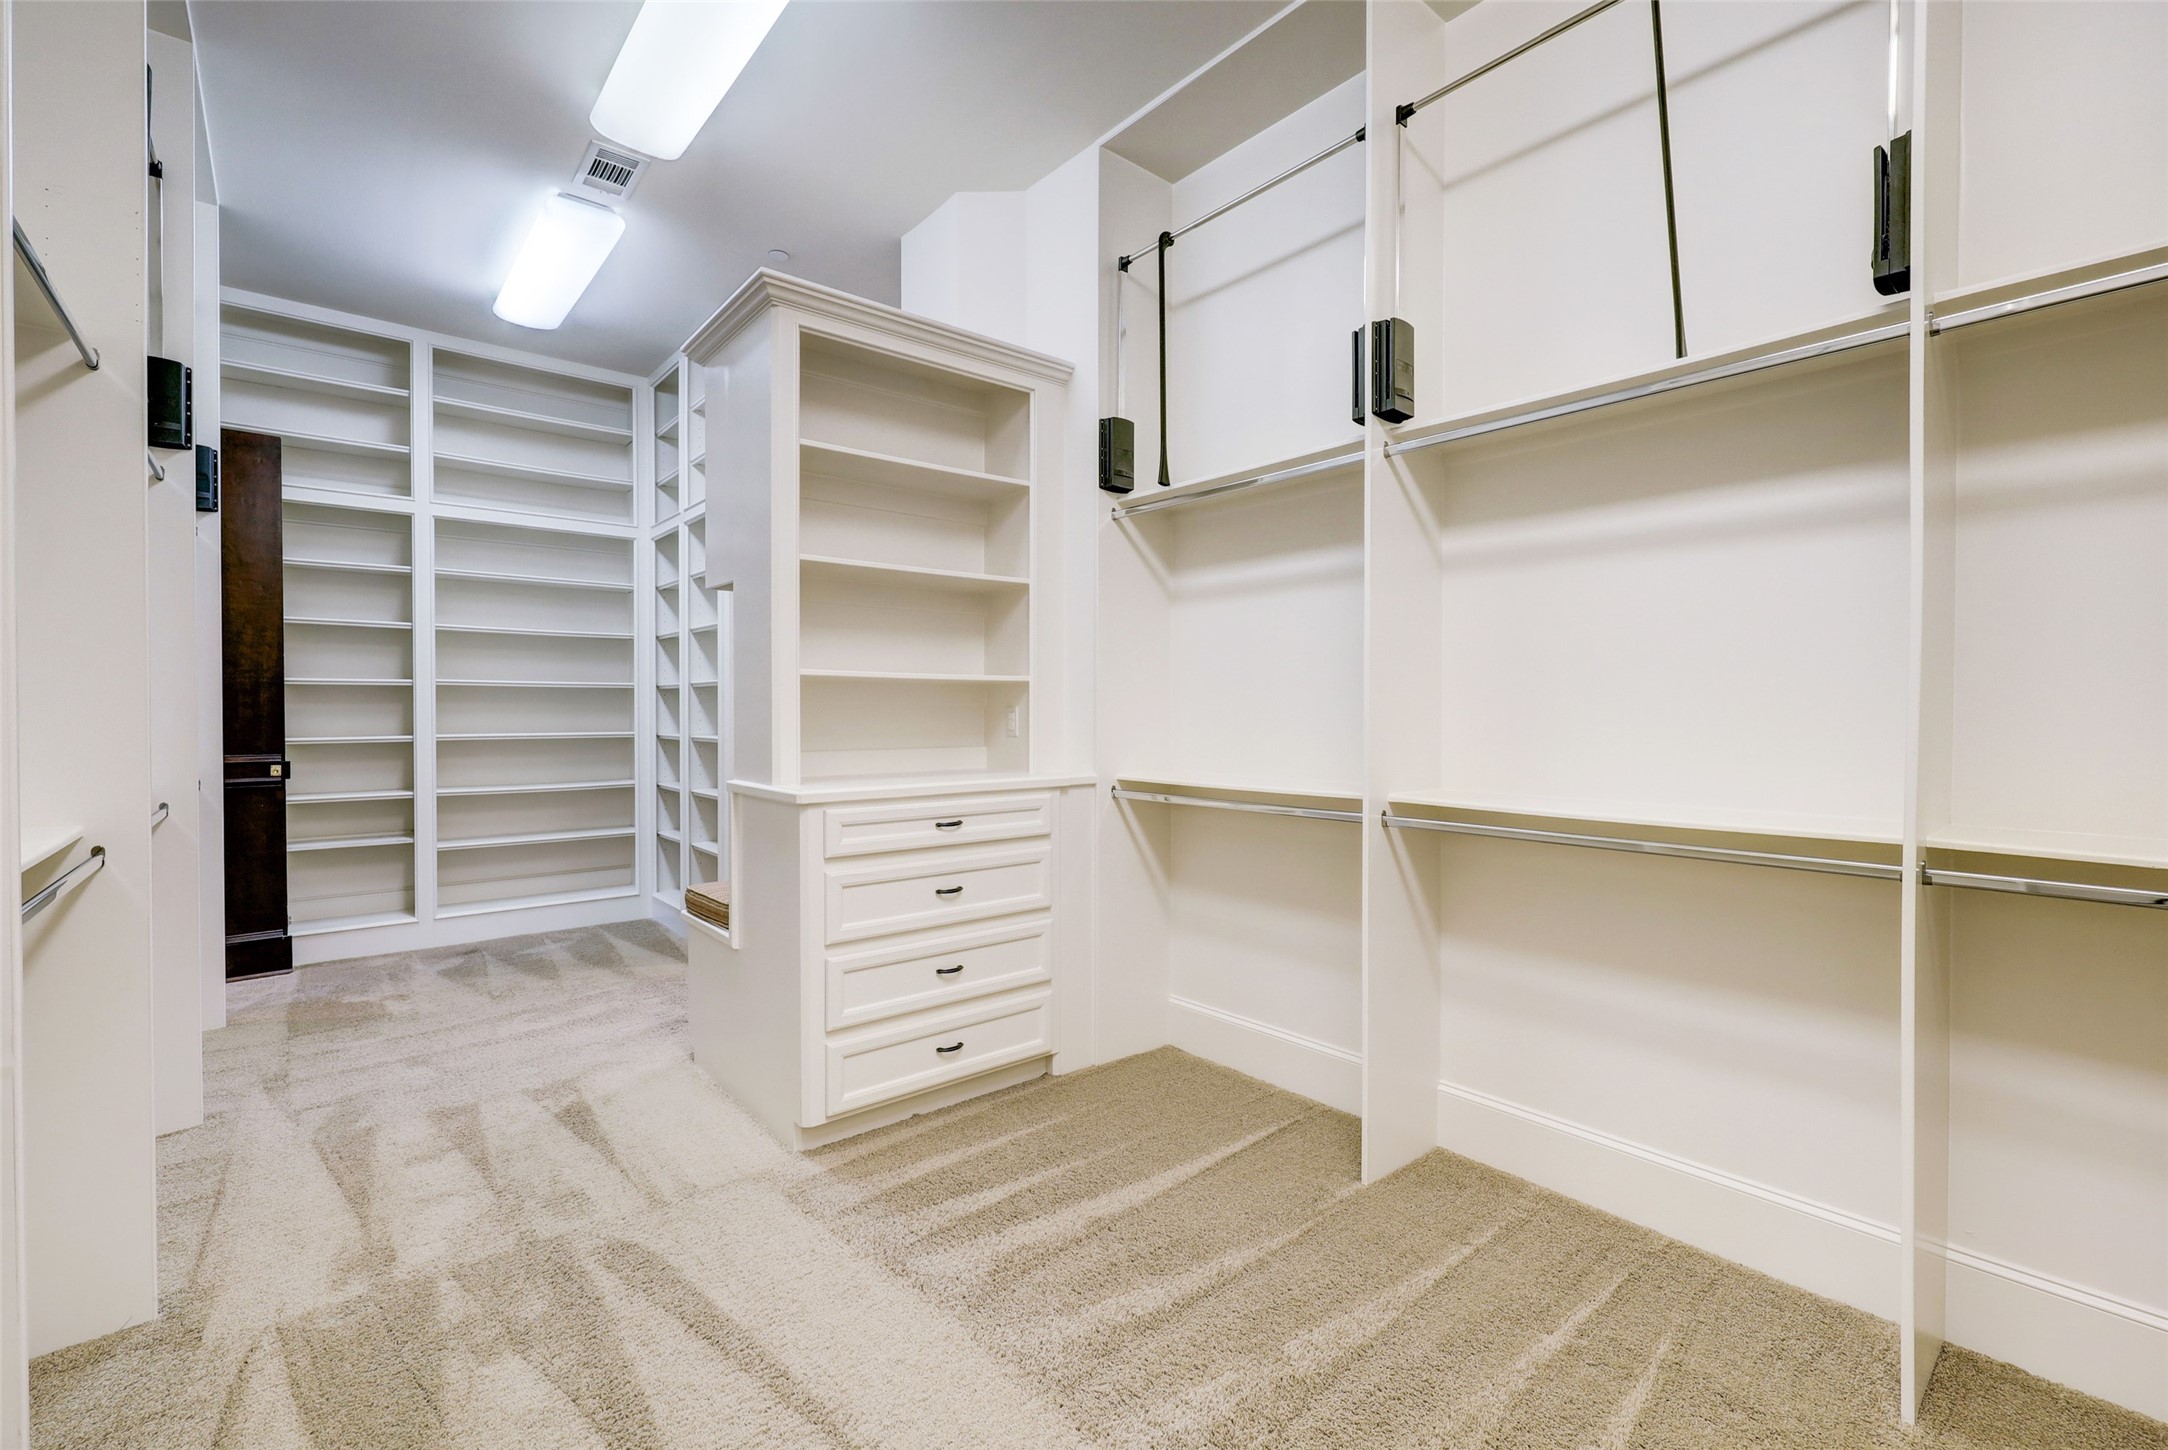 The Master Closet has most every type of storage you might fancy--dual Dressers; copious amounts of hanging space, including pull down racks; and shoe and purse storage. You name it, you can store it here!